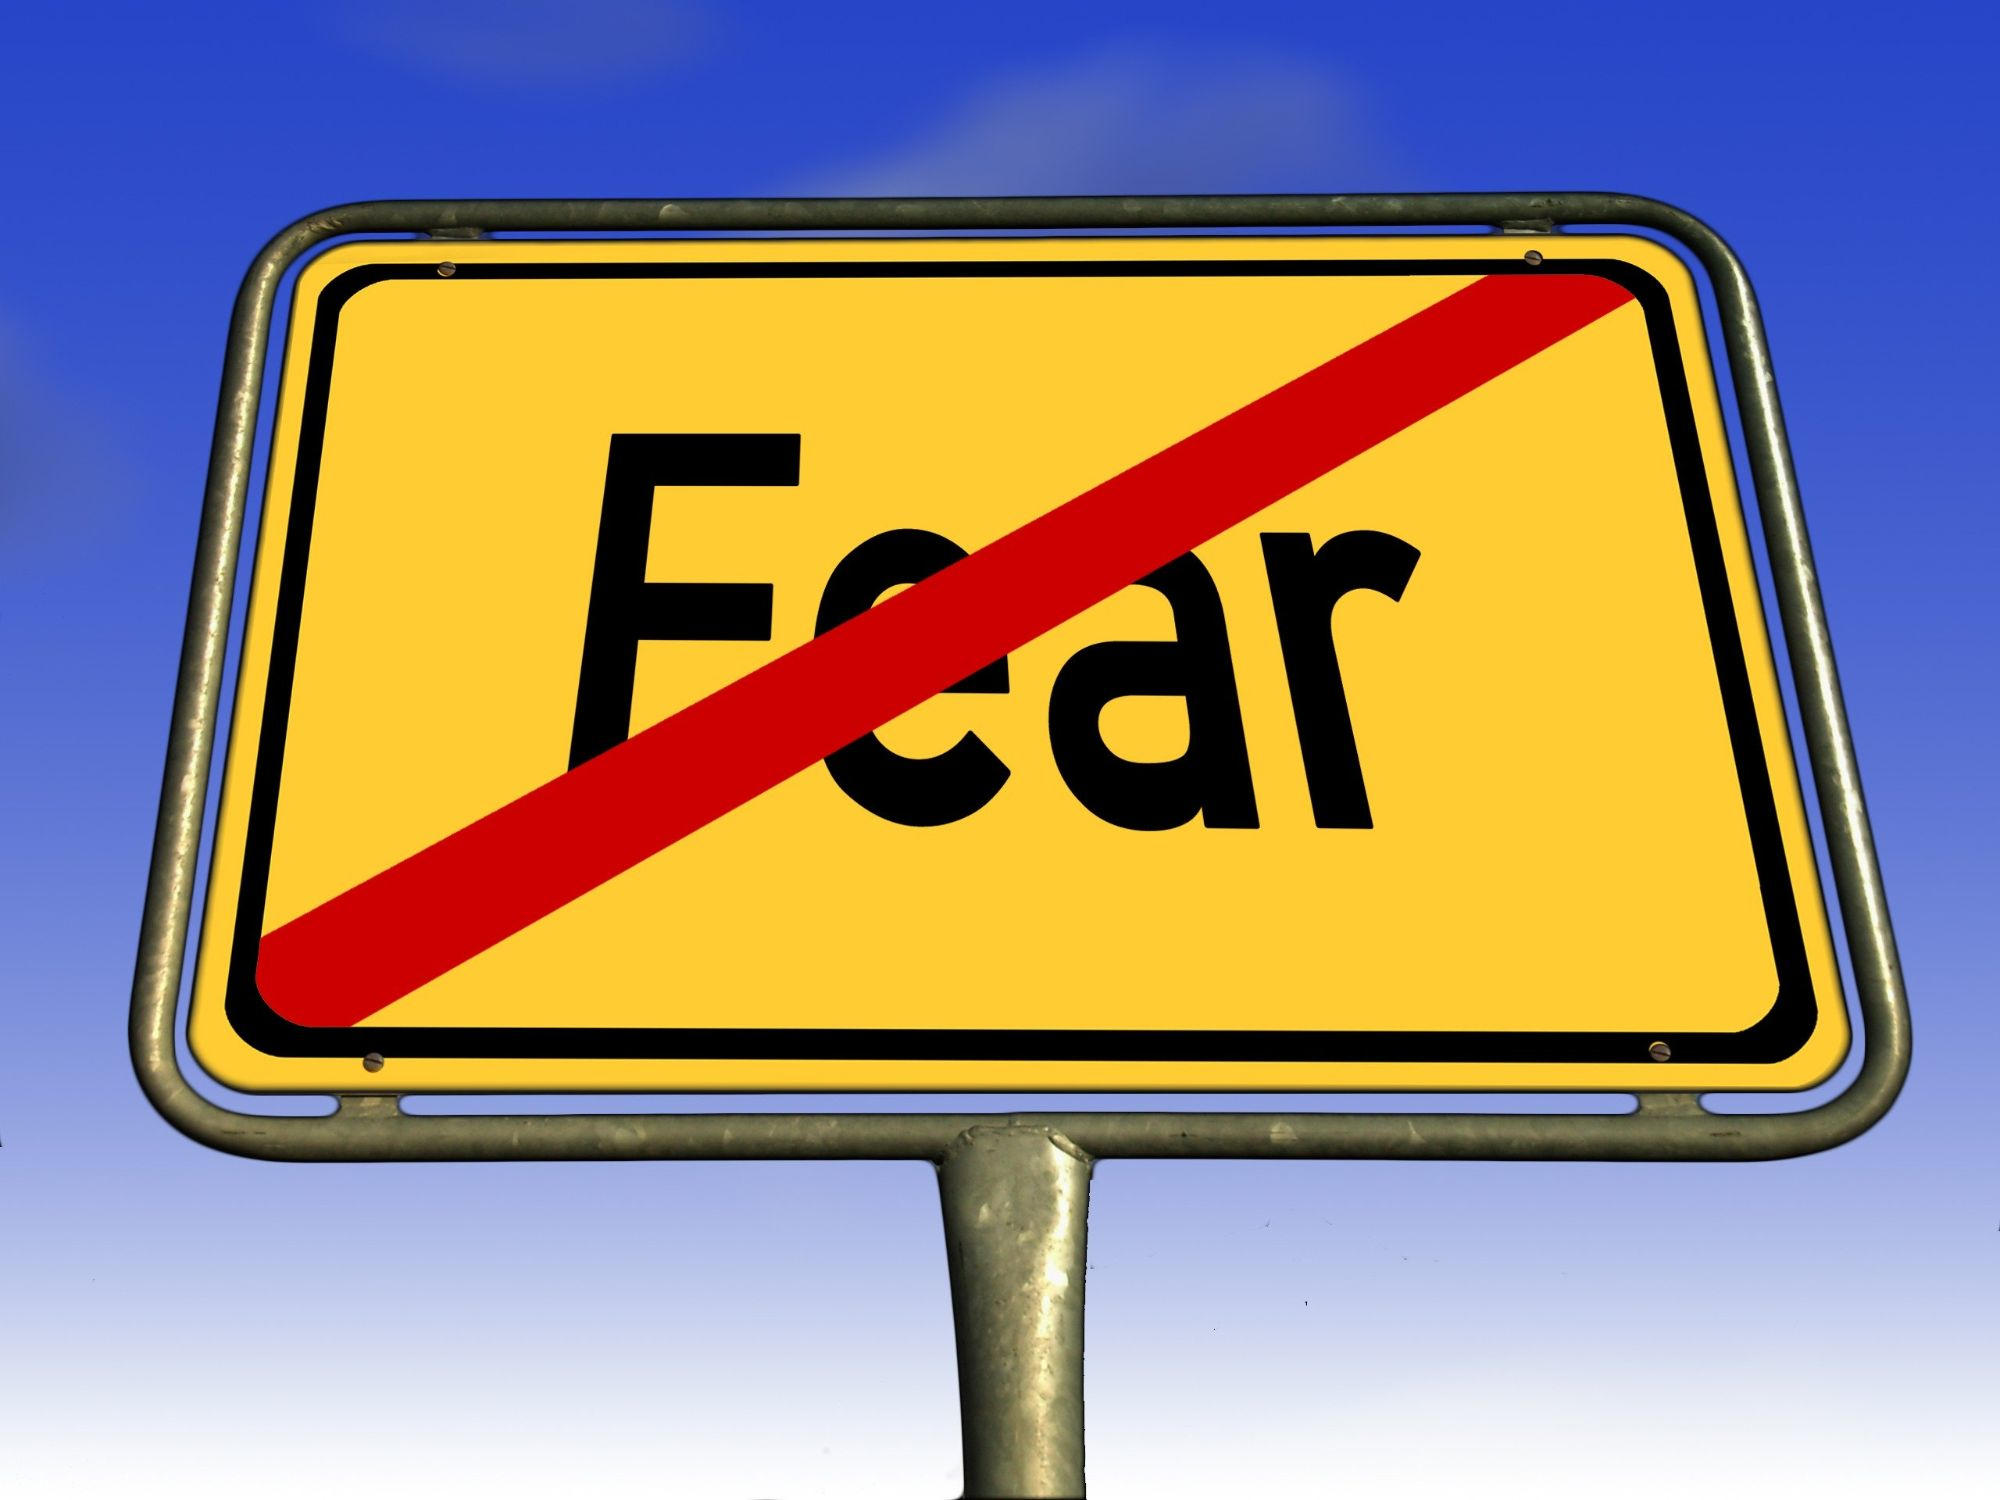 New Research: Fearlessness Can Be Learned